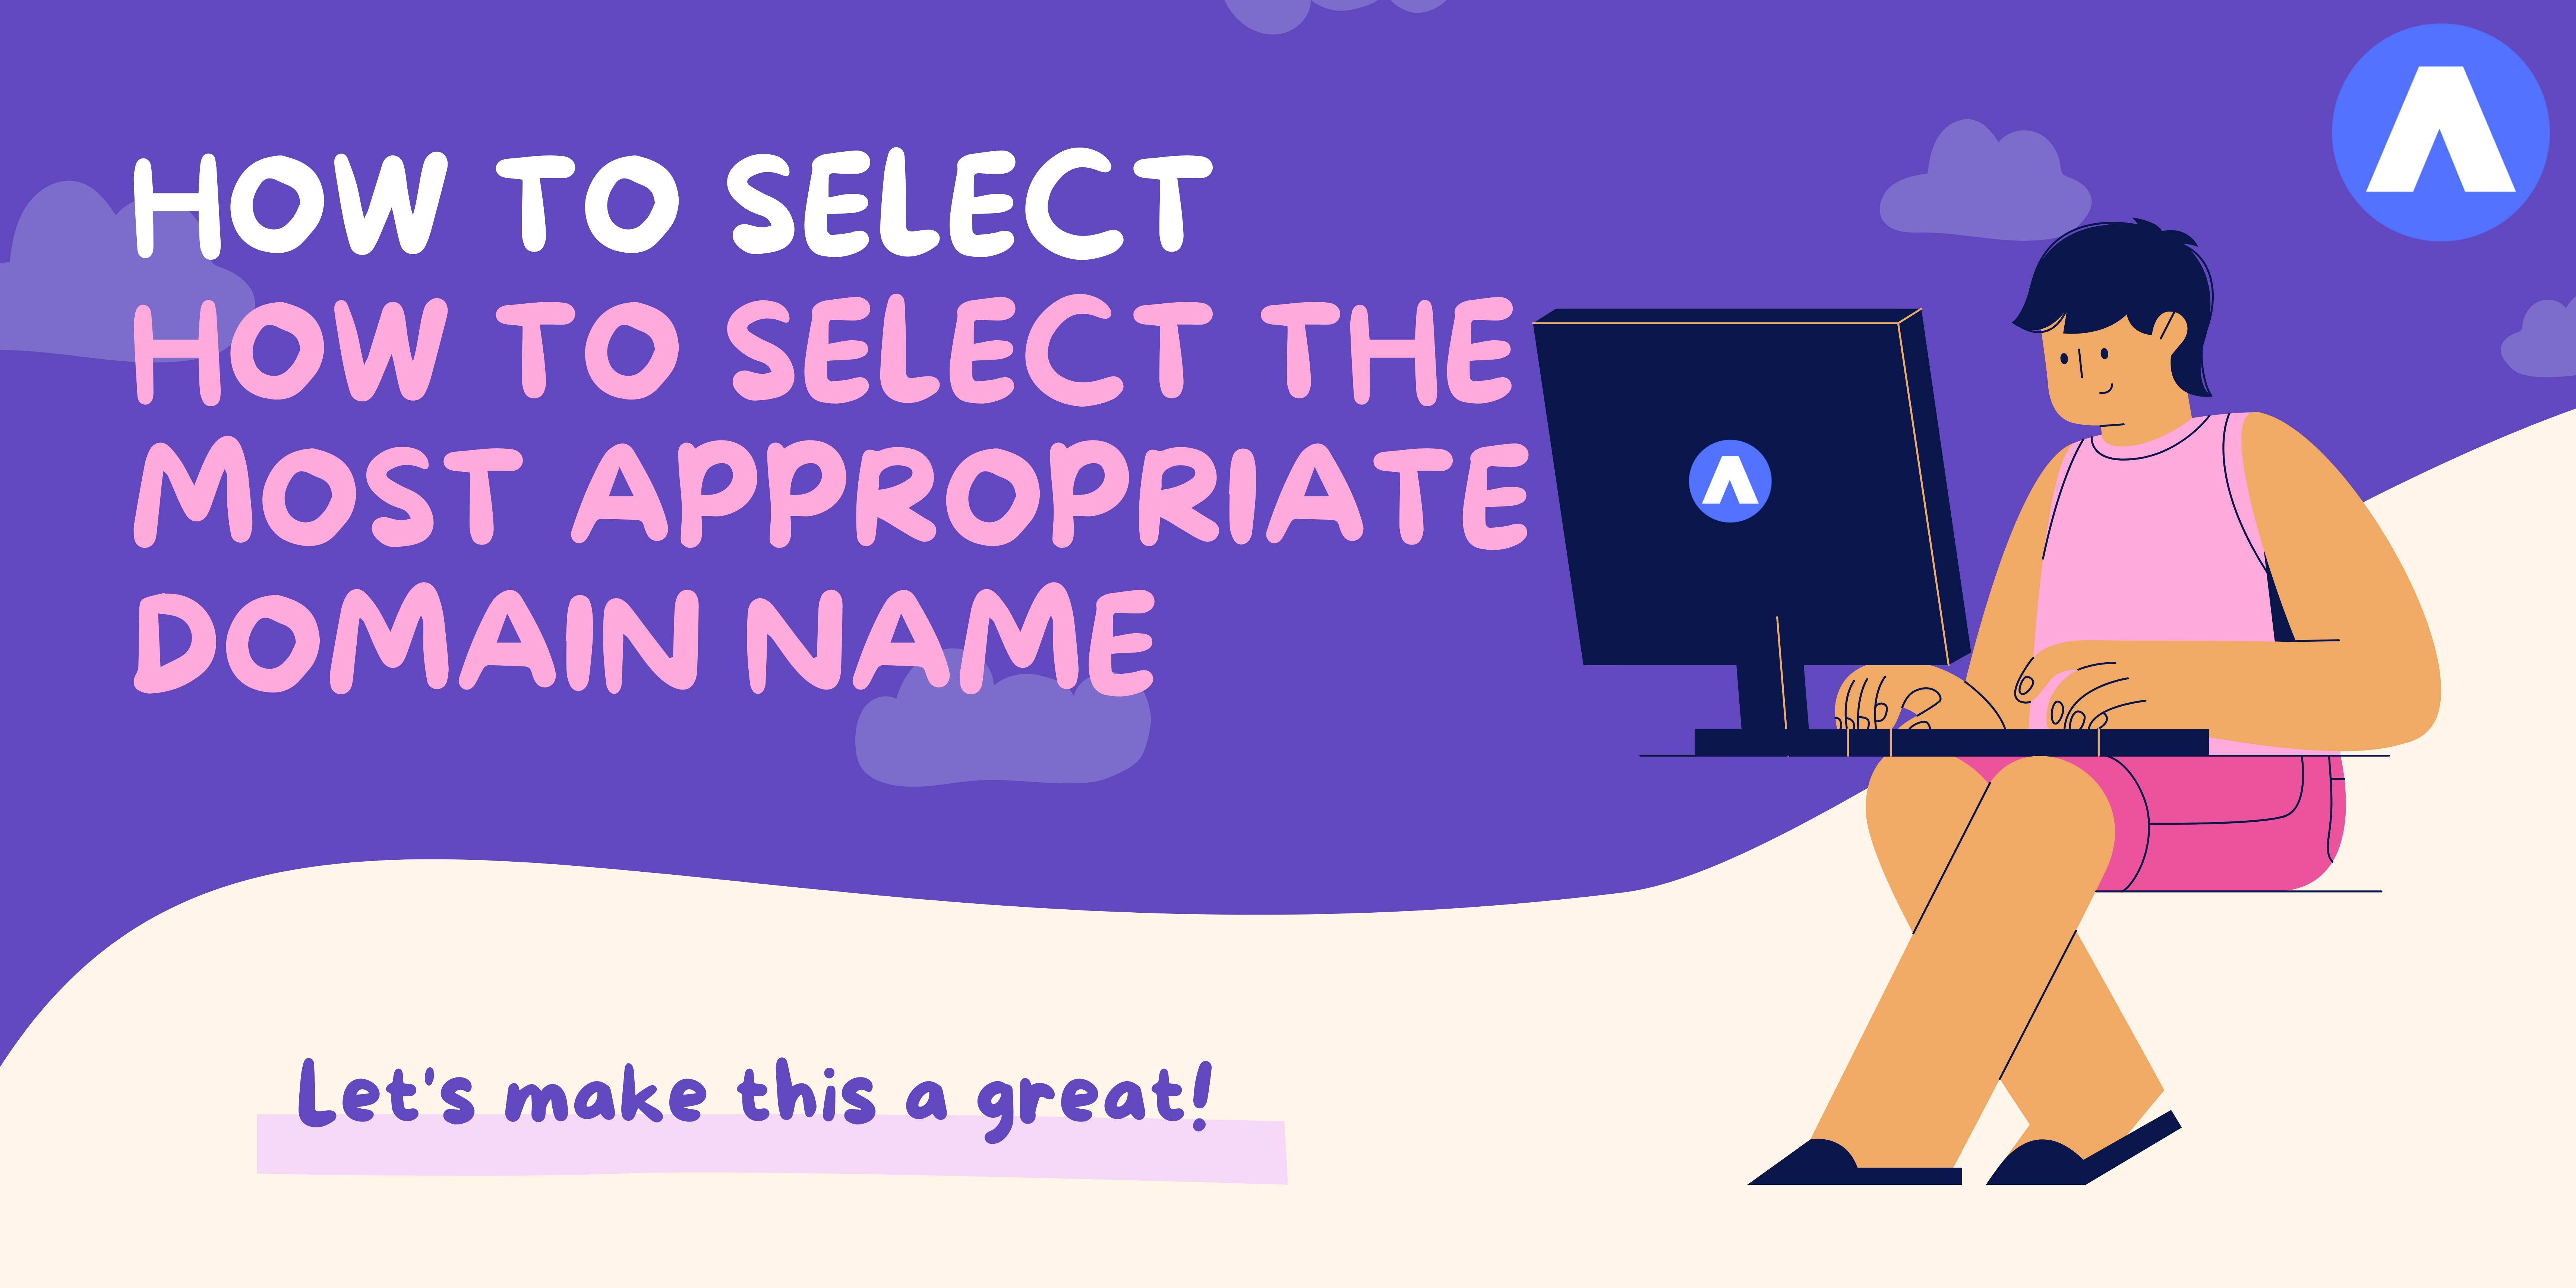 How to Select How to Select the Most Appropriate Domain Name